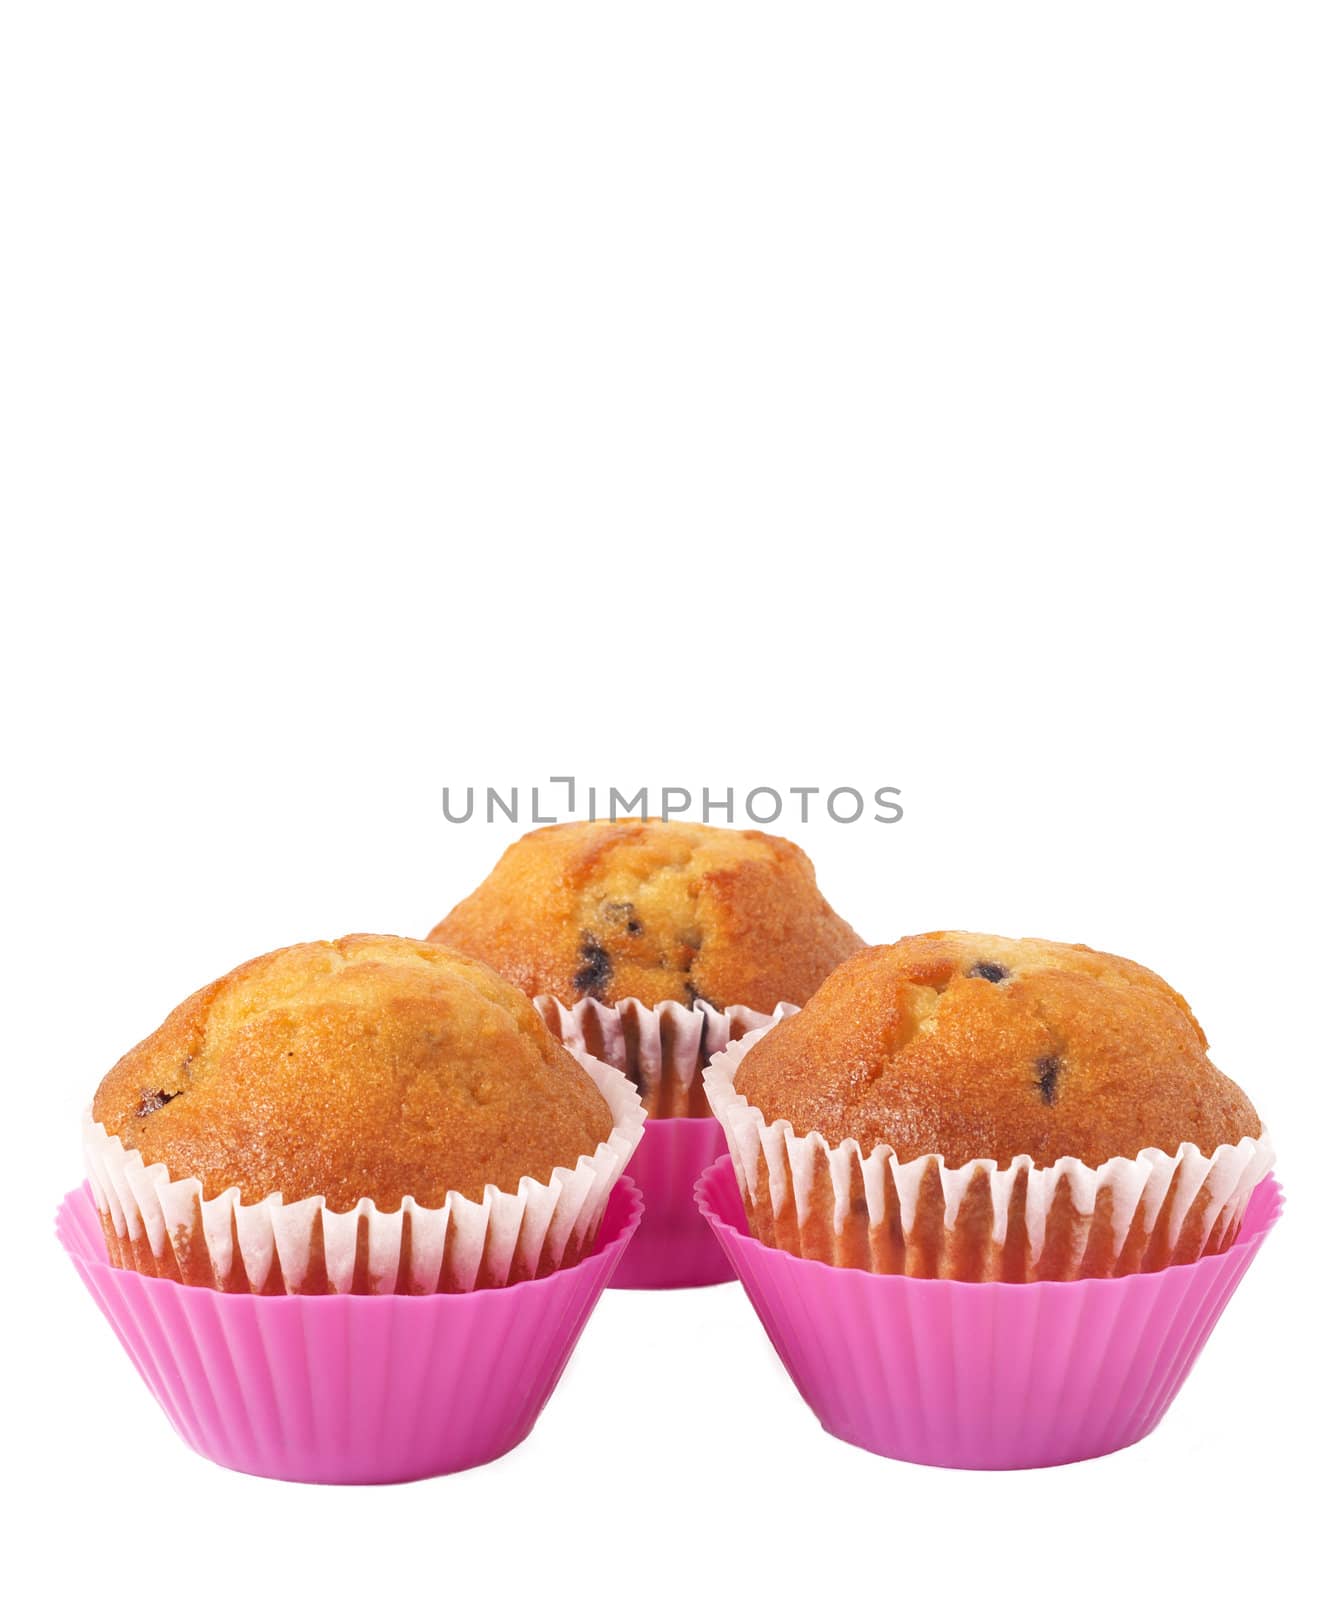 Fresh blueberry muffins in pink cups isolated on white background